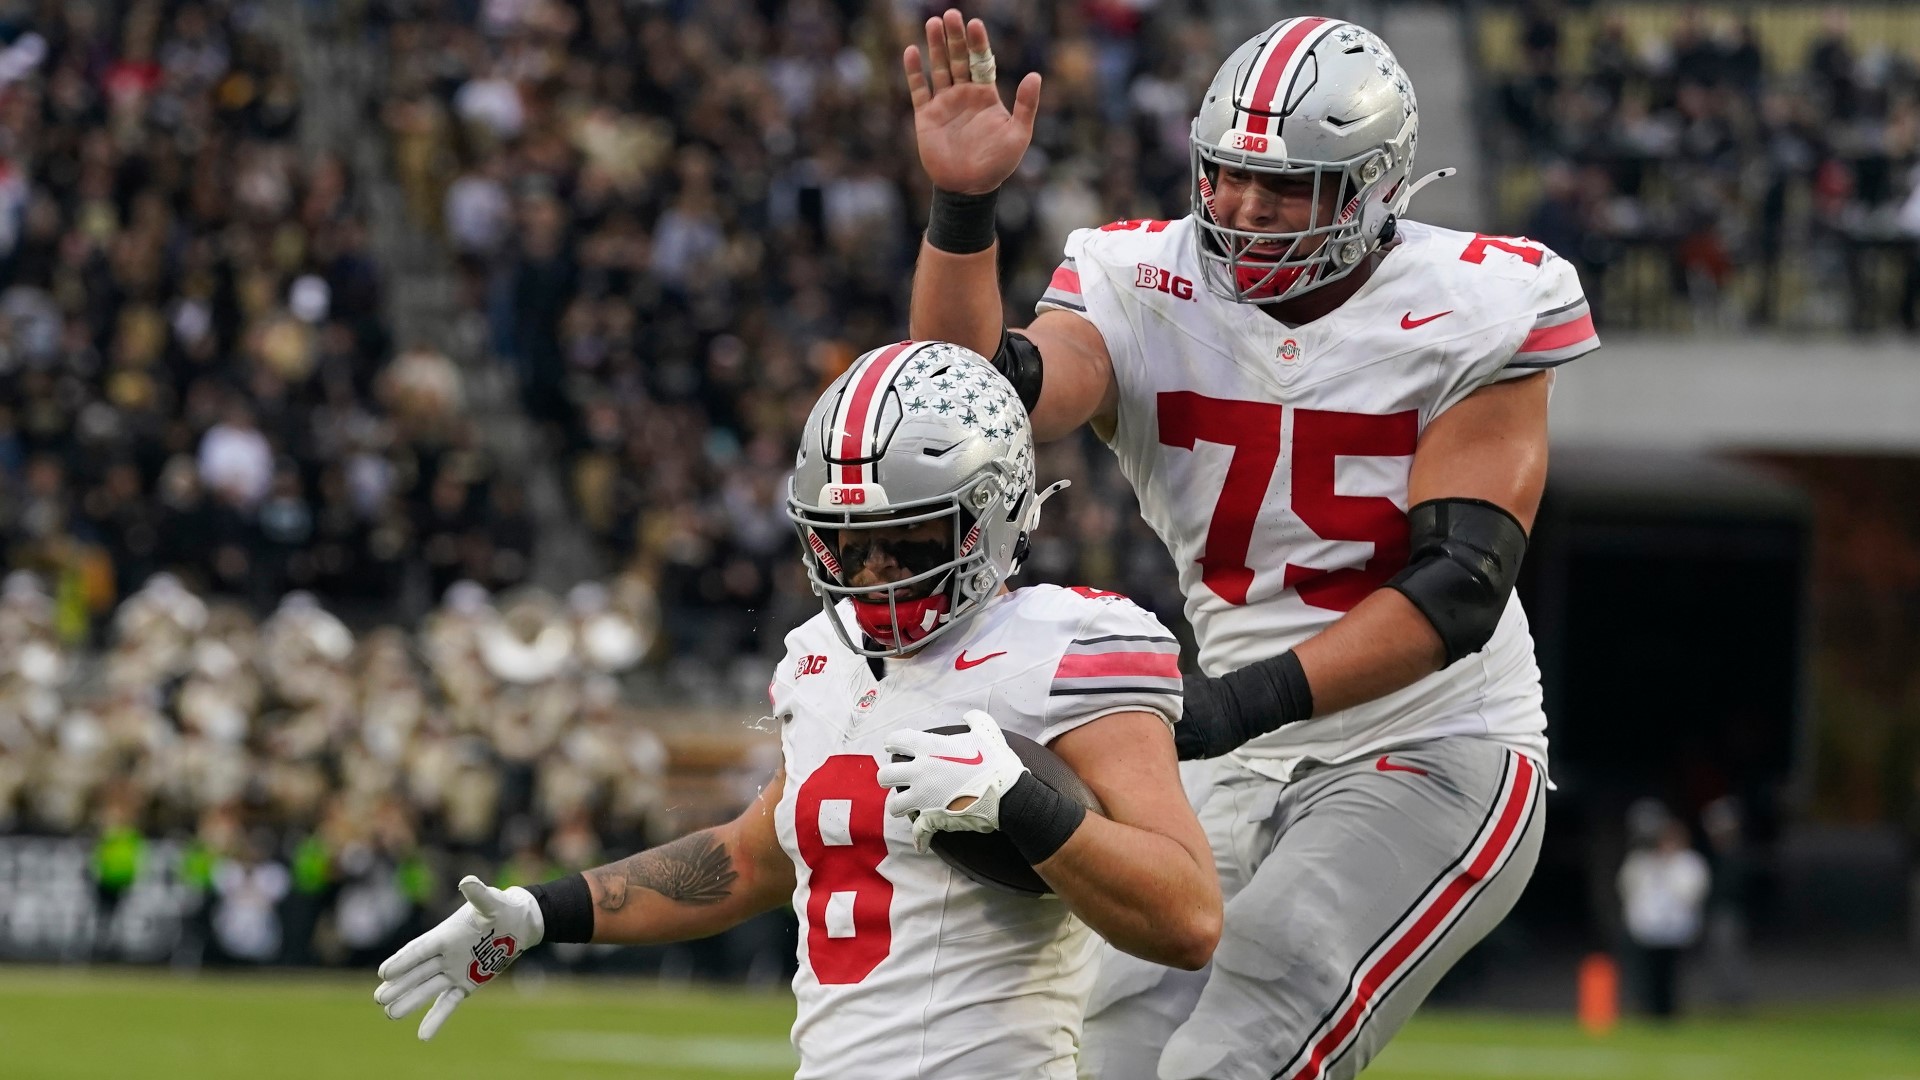 In this week's edition of Silver Bullet Points, Dom Tiberi and Dave Holmes break down what to expect from this week's game between the Buckeyes and Nittany Lions.